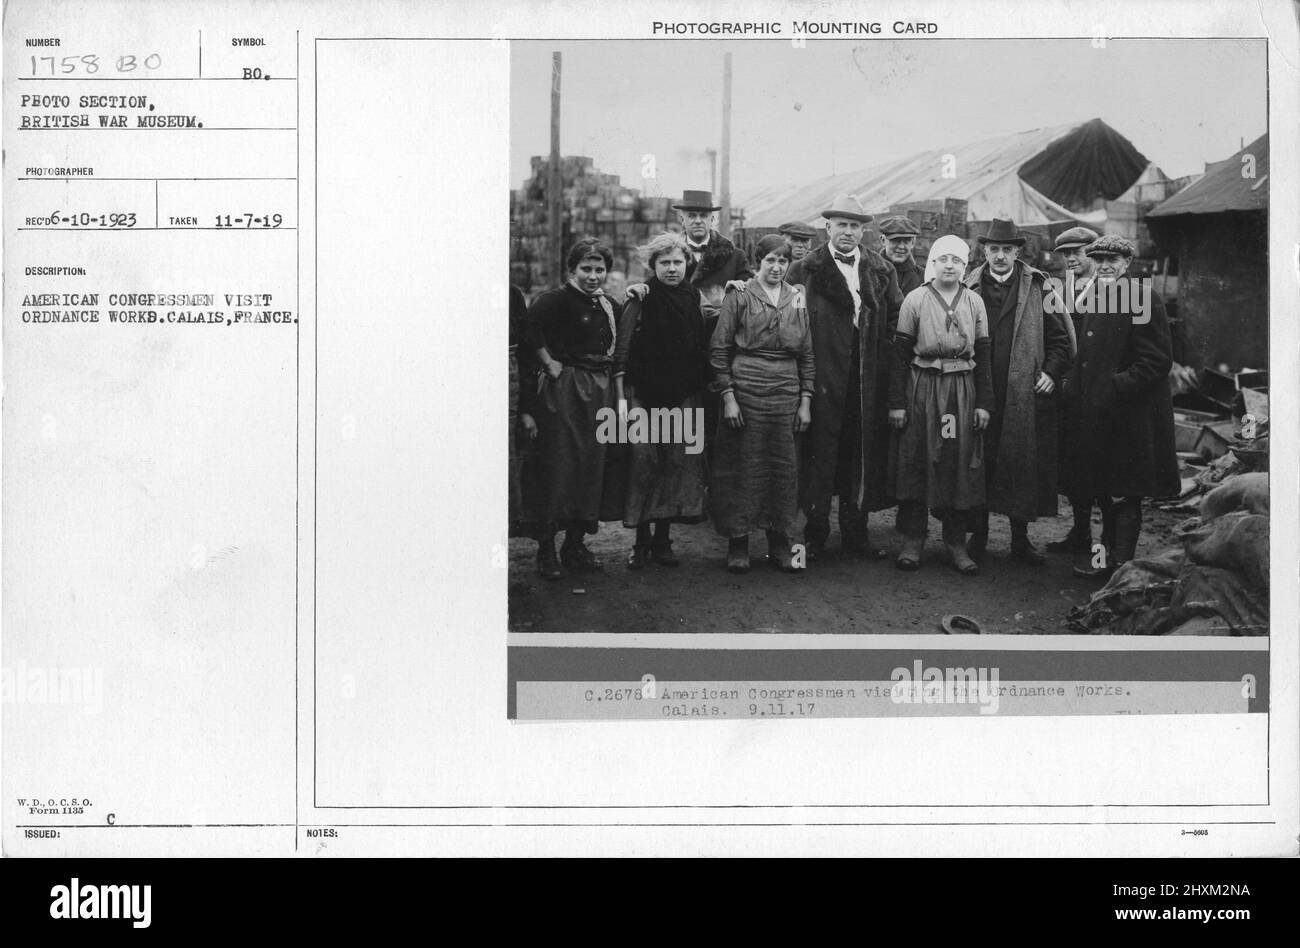 American congressman visit ordnance works. Calais, France. Collection of World War I Photographs, 1914-1918 that depict the military activities of British and other nation's armed forces and personnel during World War I. Stock Photo